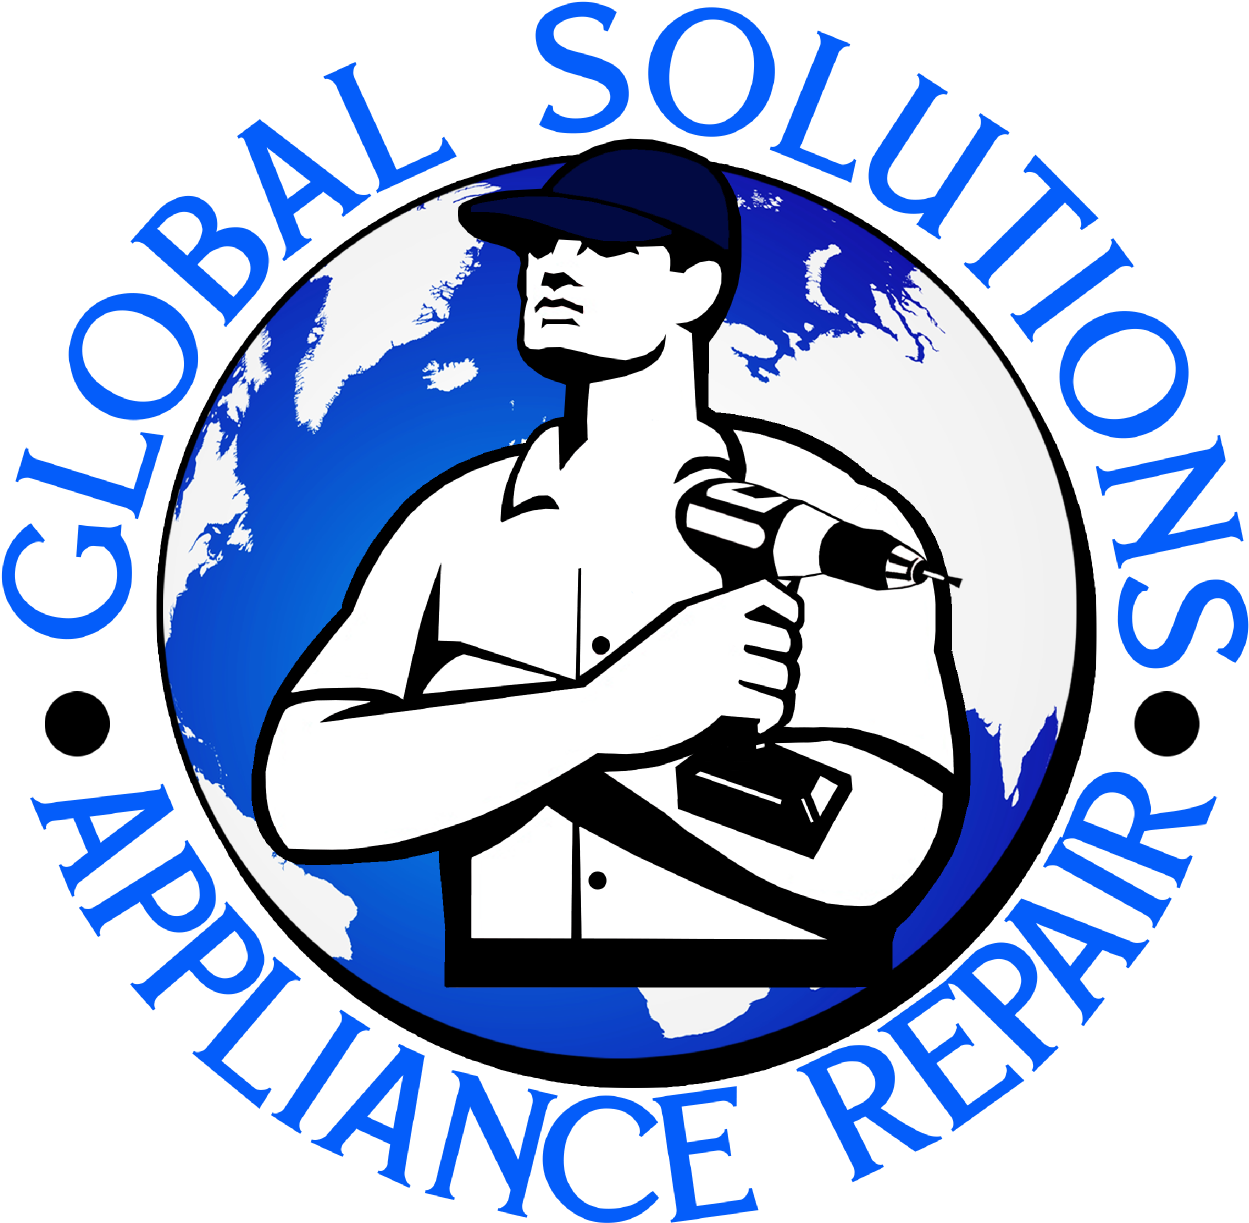 Kew Gardens, Ny Global Solutions Appliance Repair - Global Solutions Appliance Repair (1350x1350)